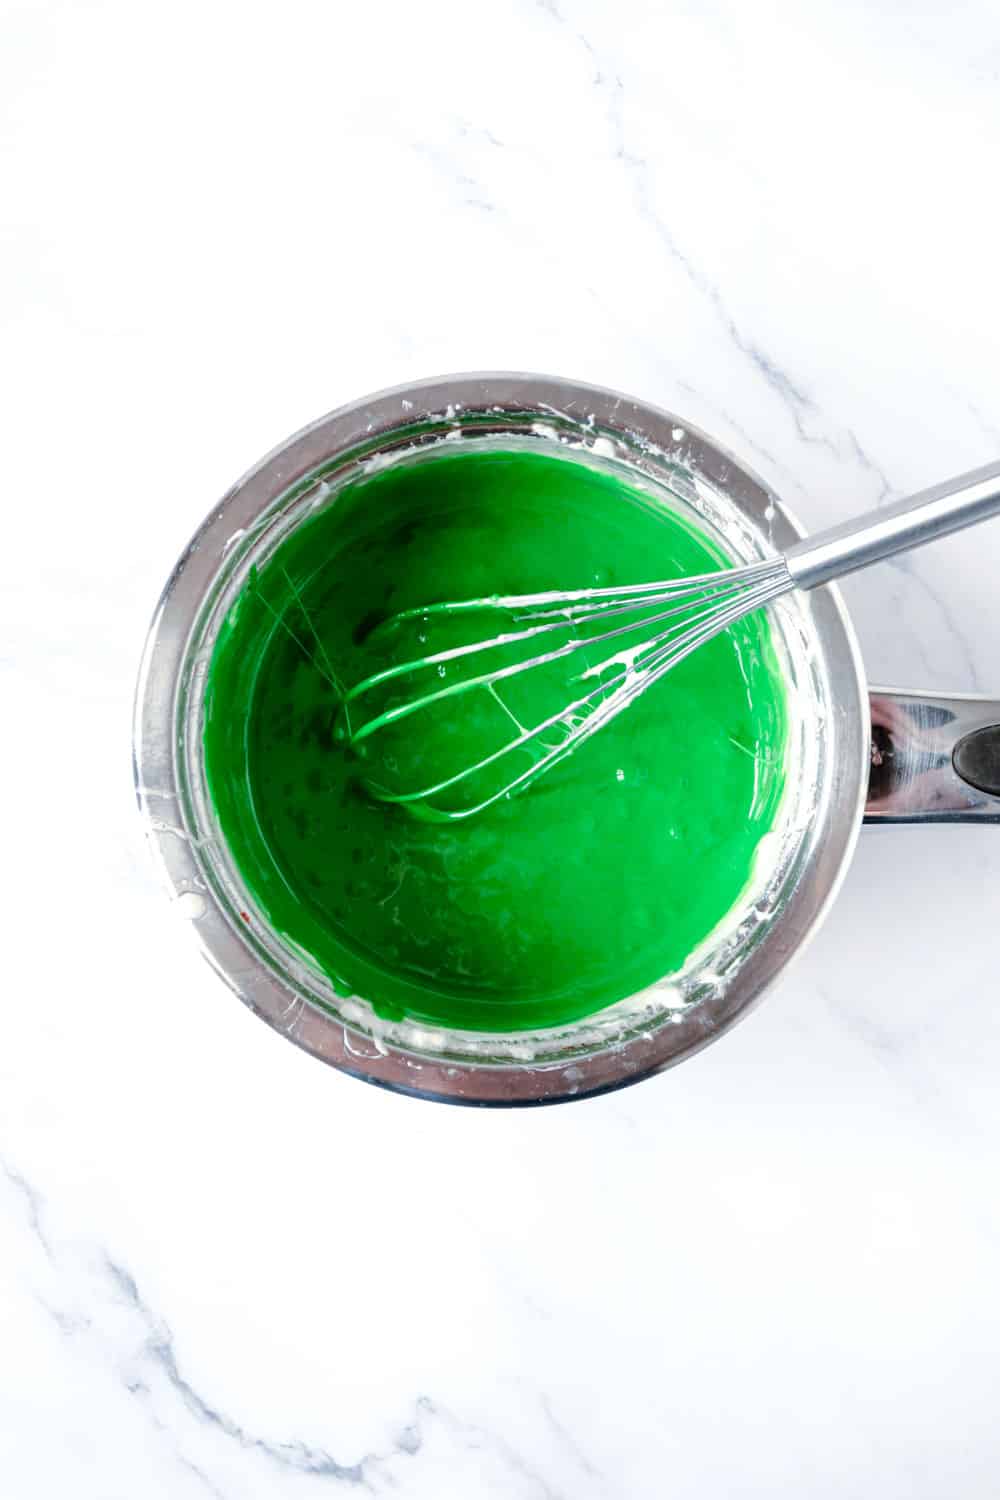 add green food coloring to marshmallow mixture